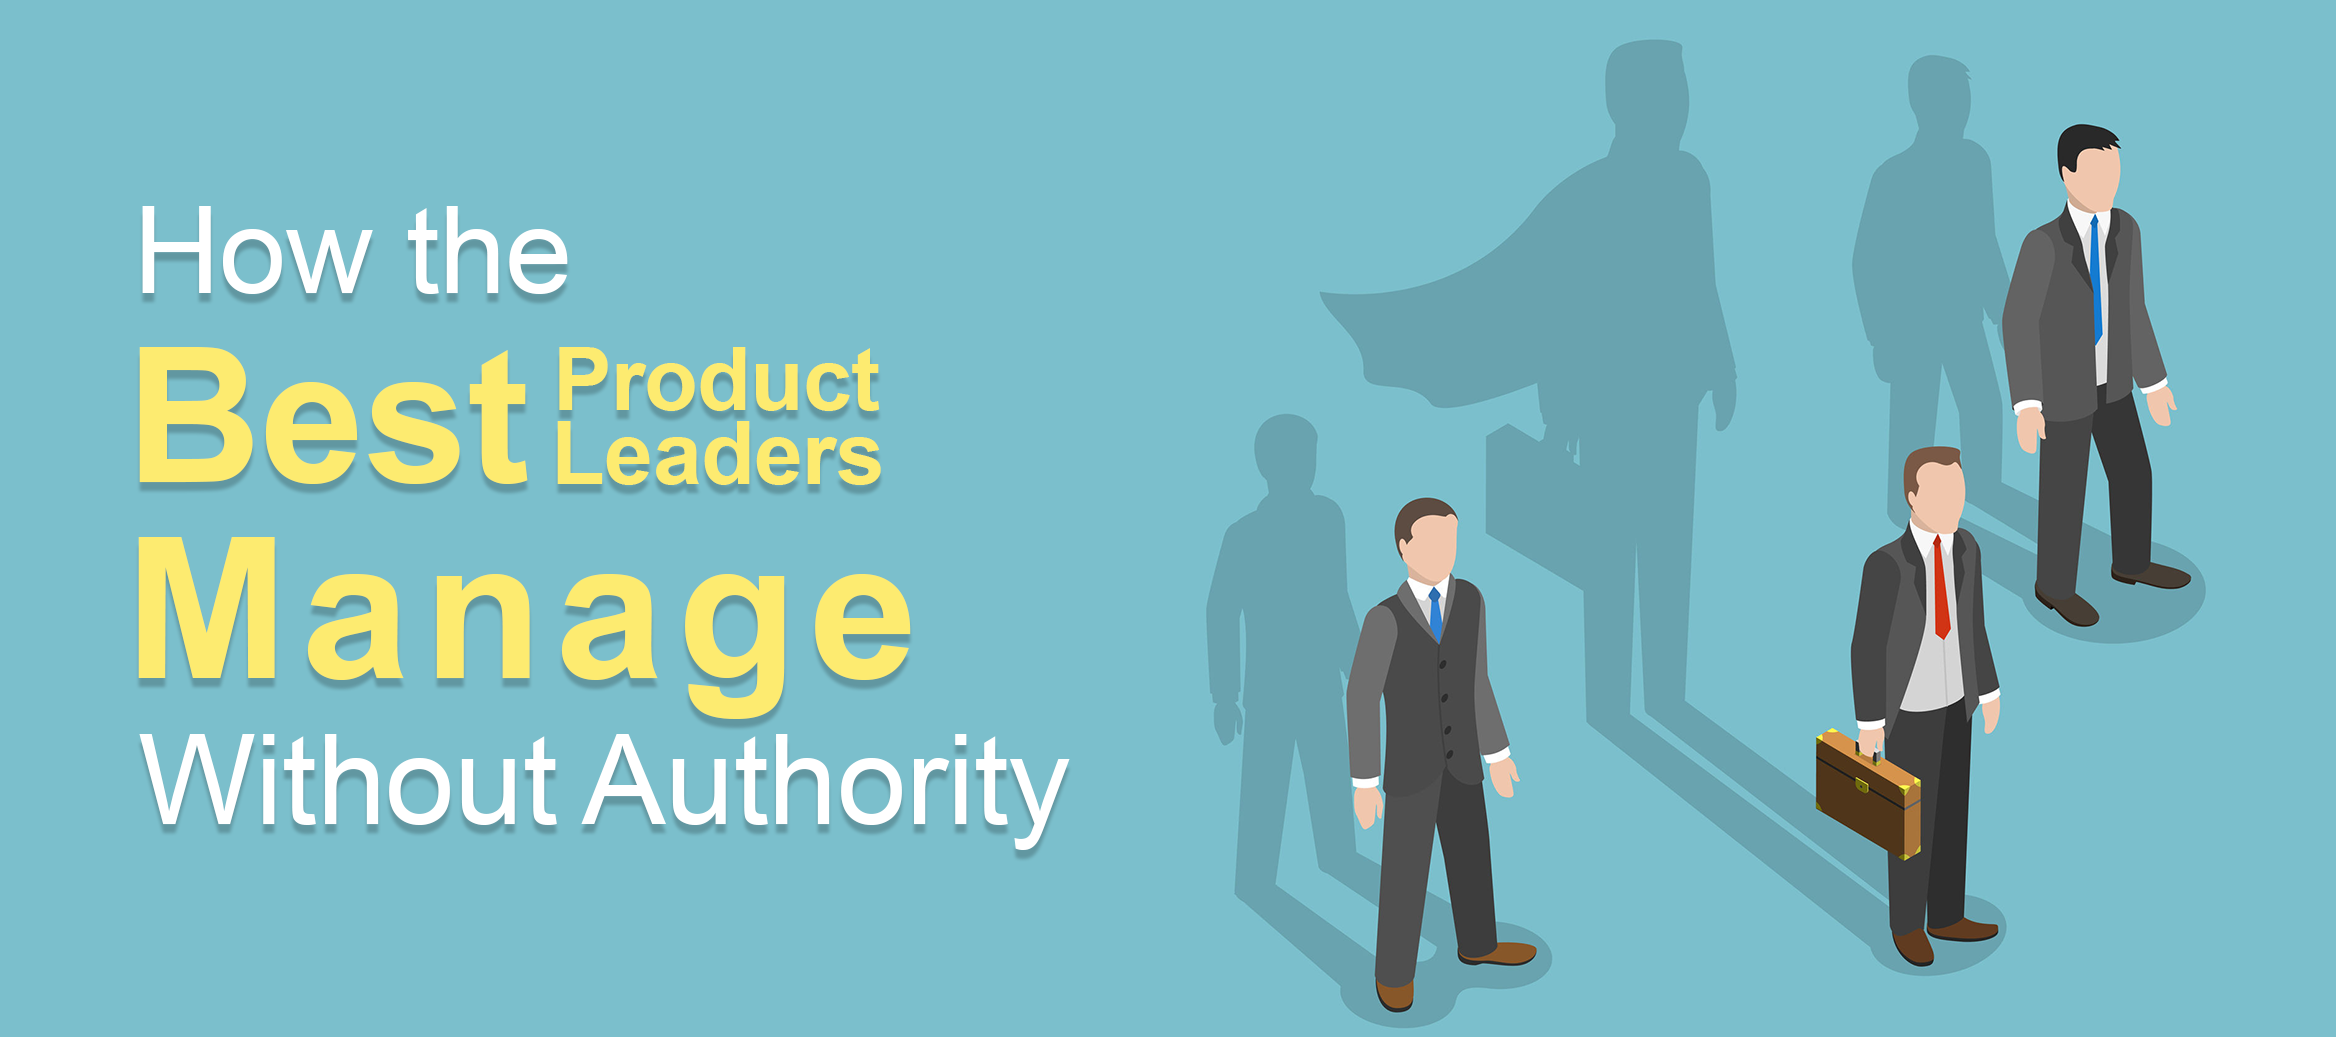 How the Best Product Leaders Manage Without Authority